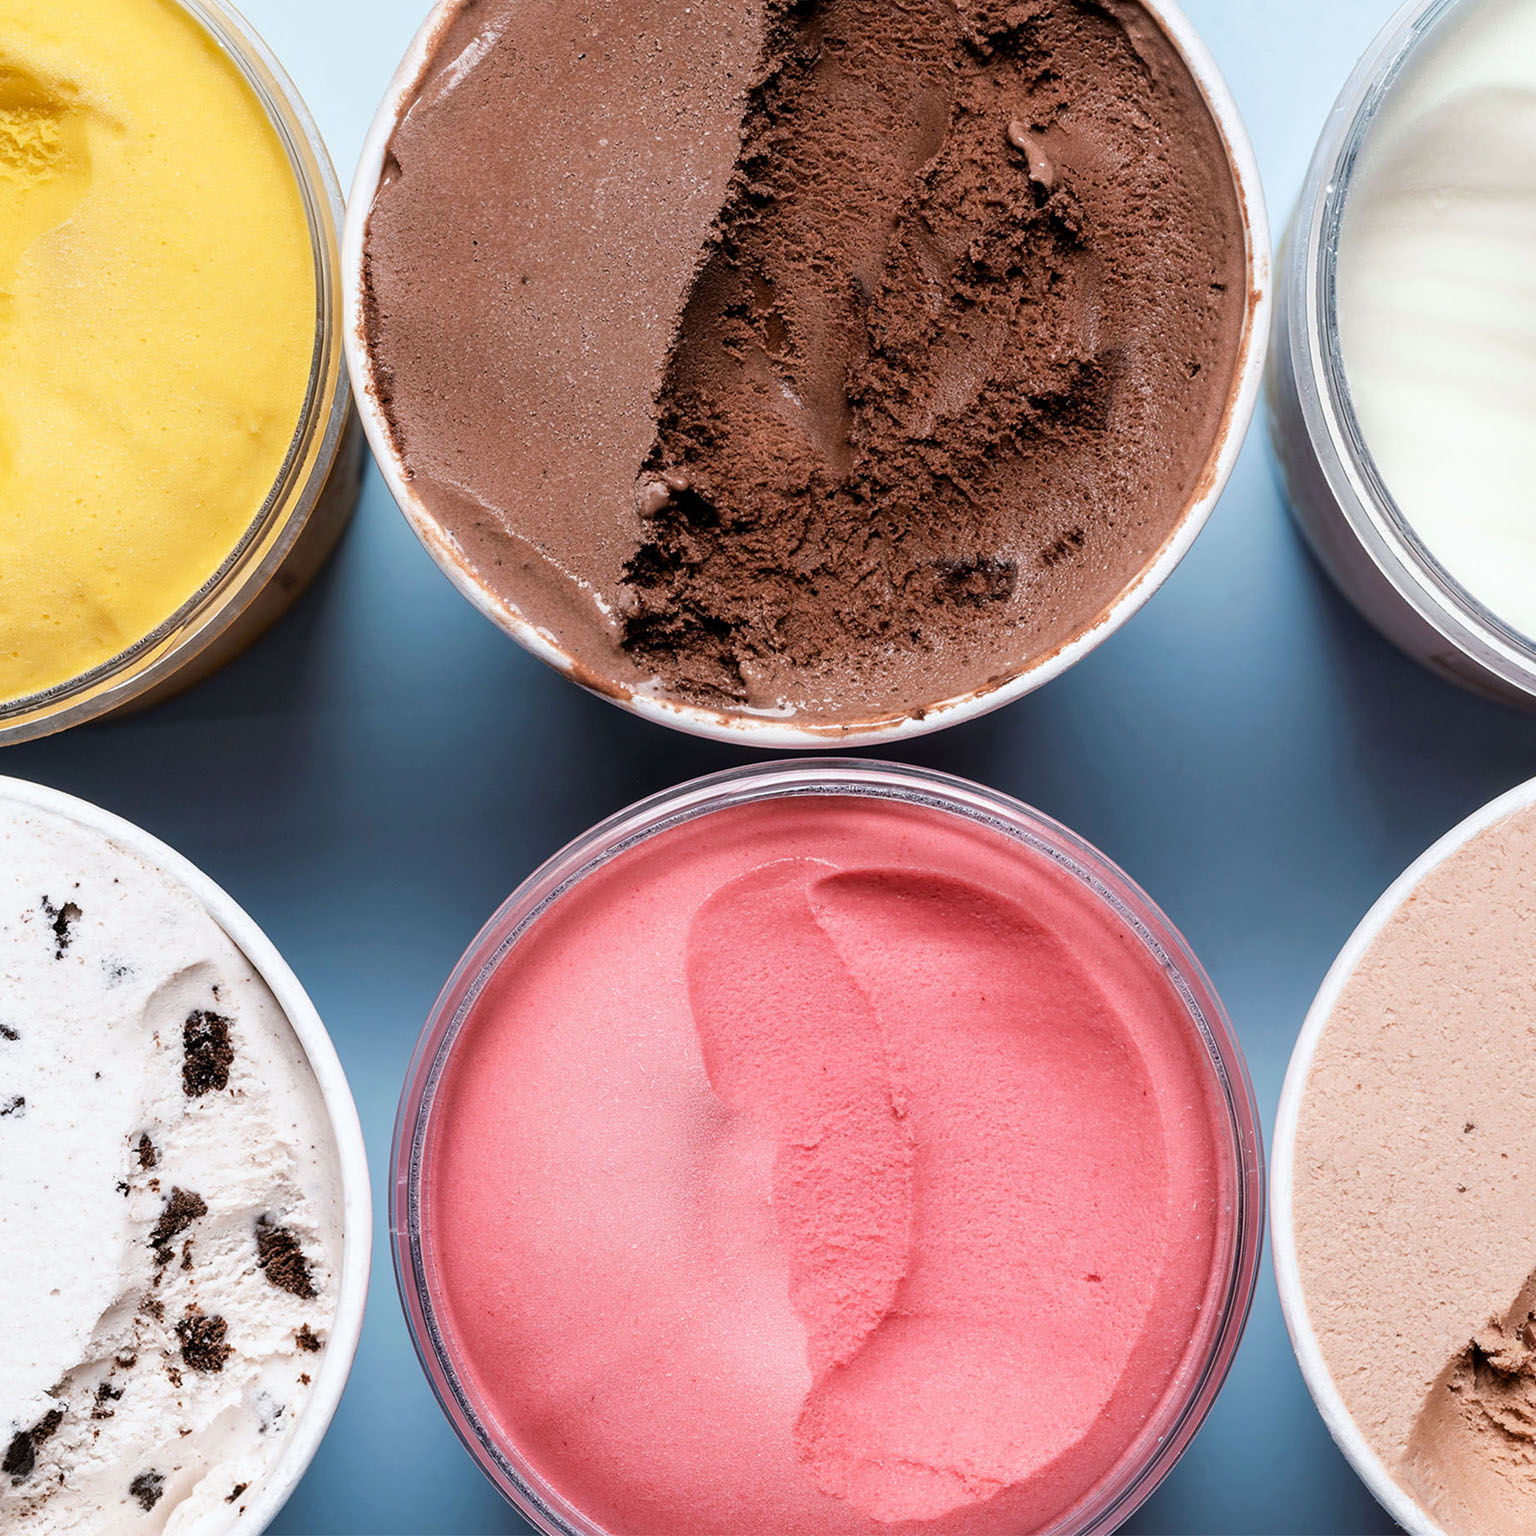 Unilever switches Carte D'Or ice cream to paper tubs